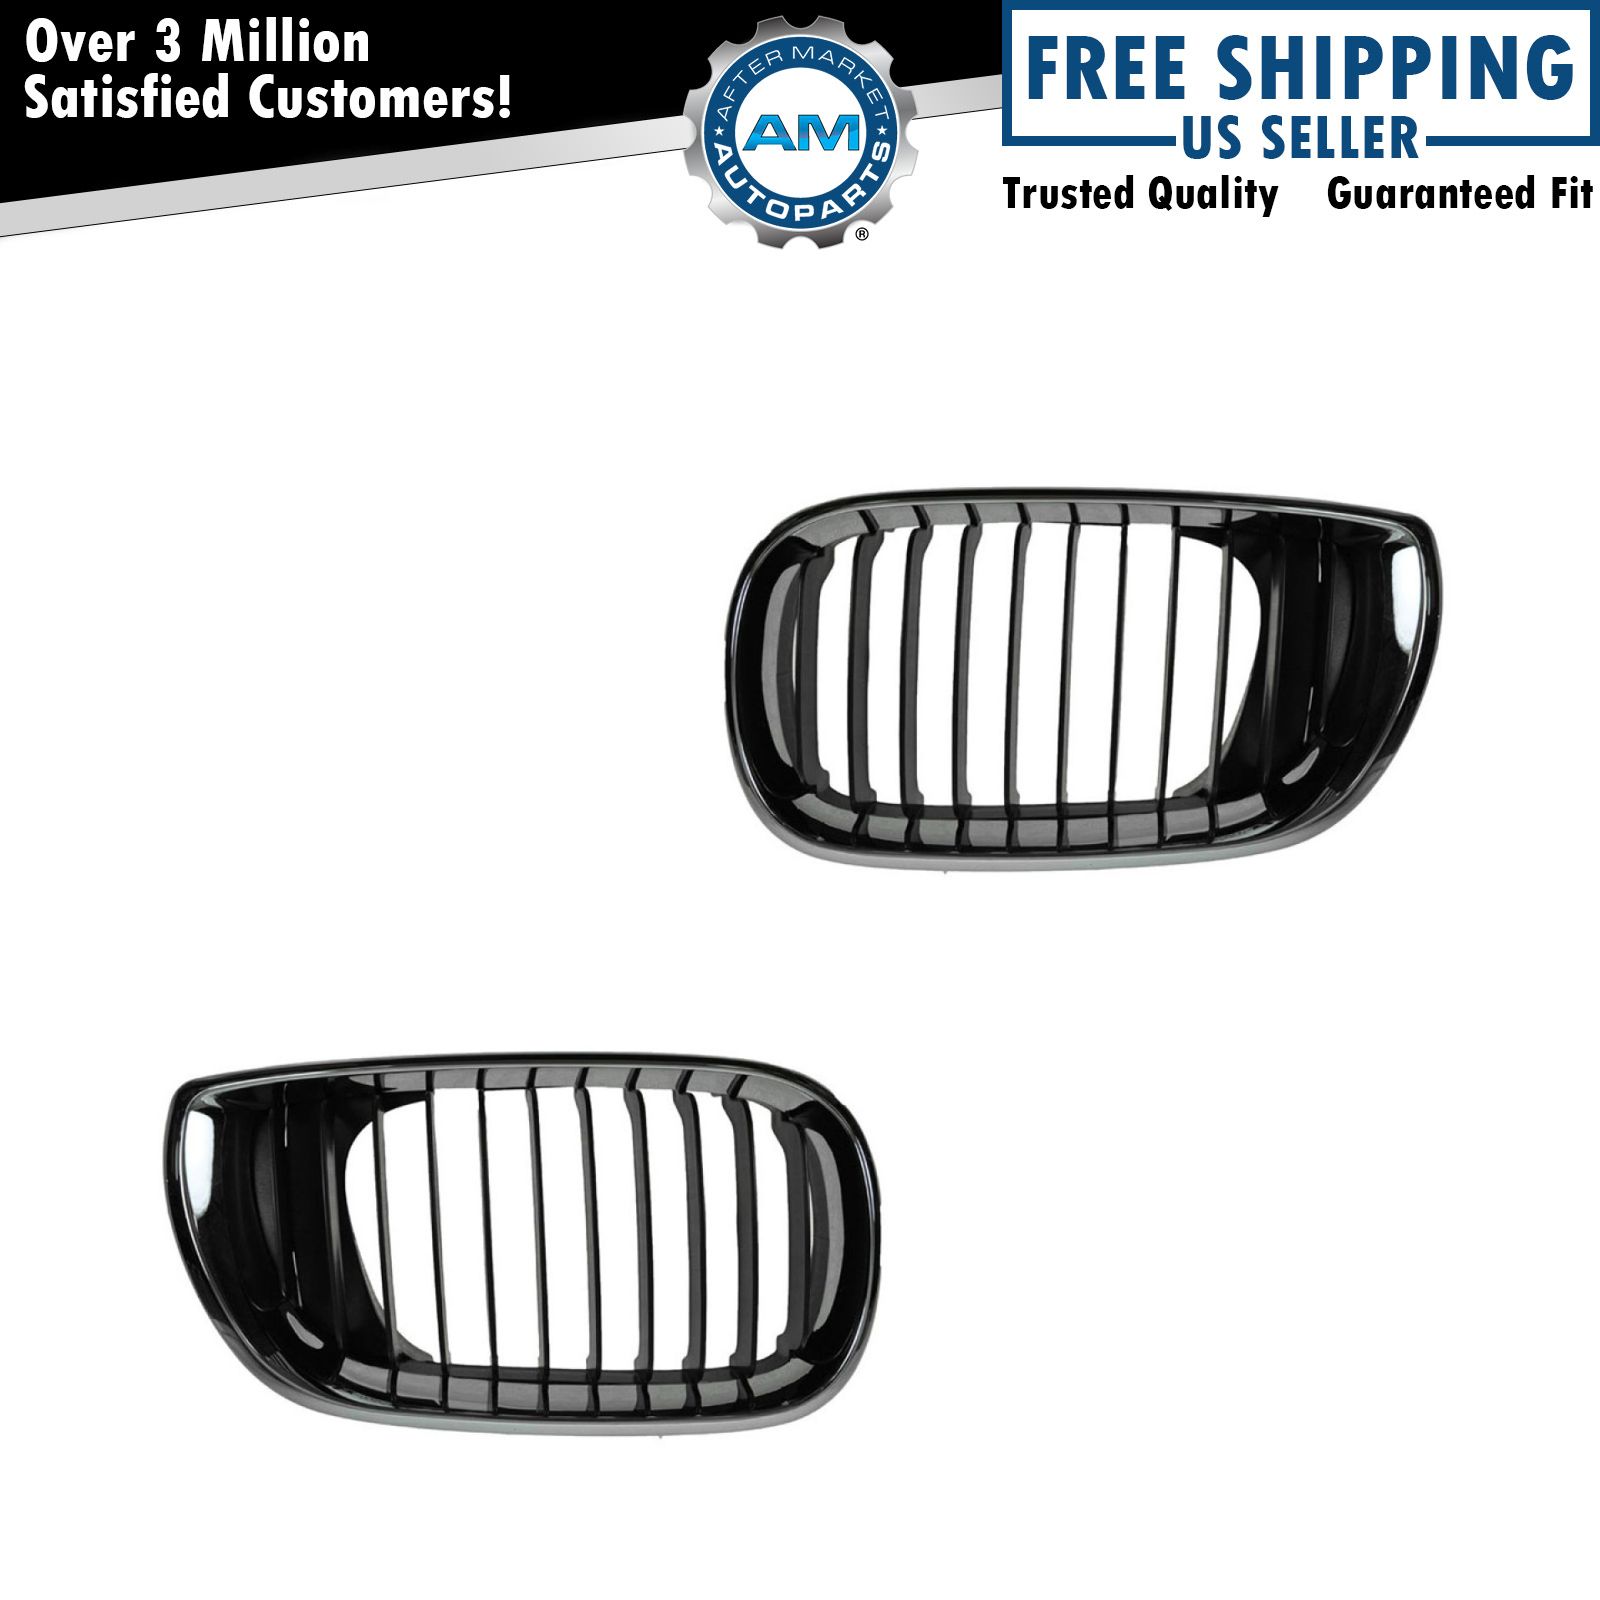 Upper Grille Grill Chrome & Black Pair Set NEW for 02-05 BMW 3 Series E46 4 Door